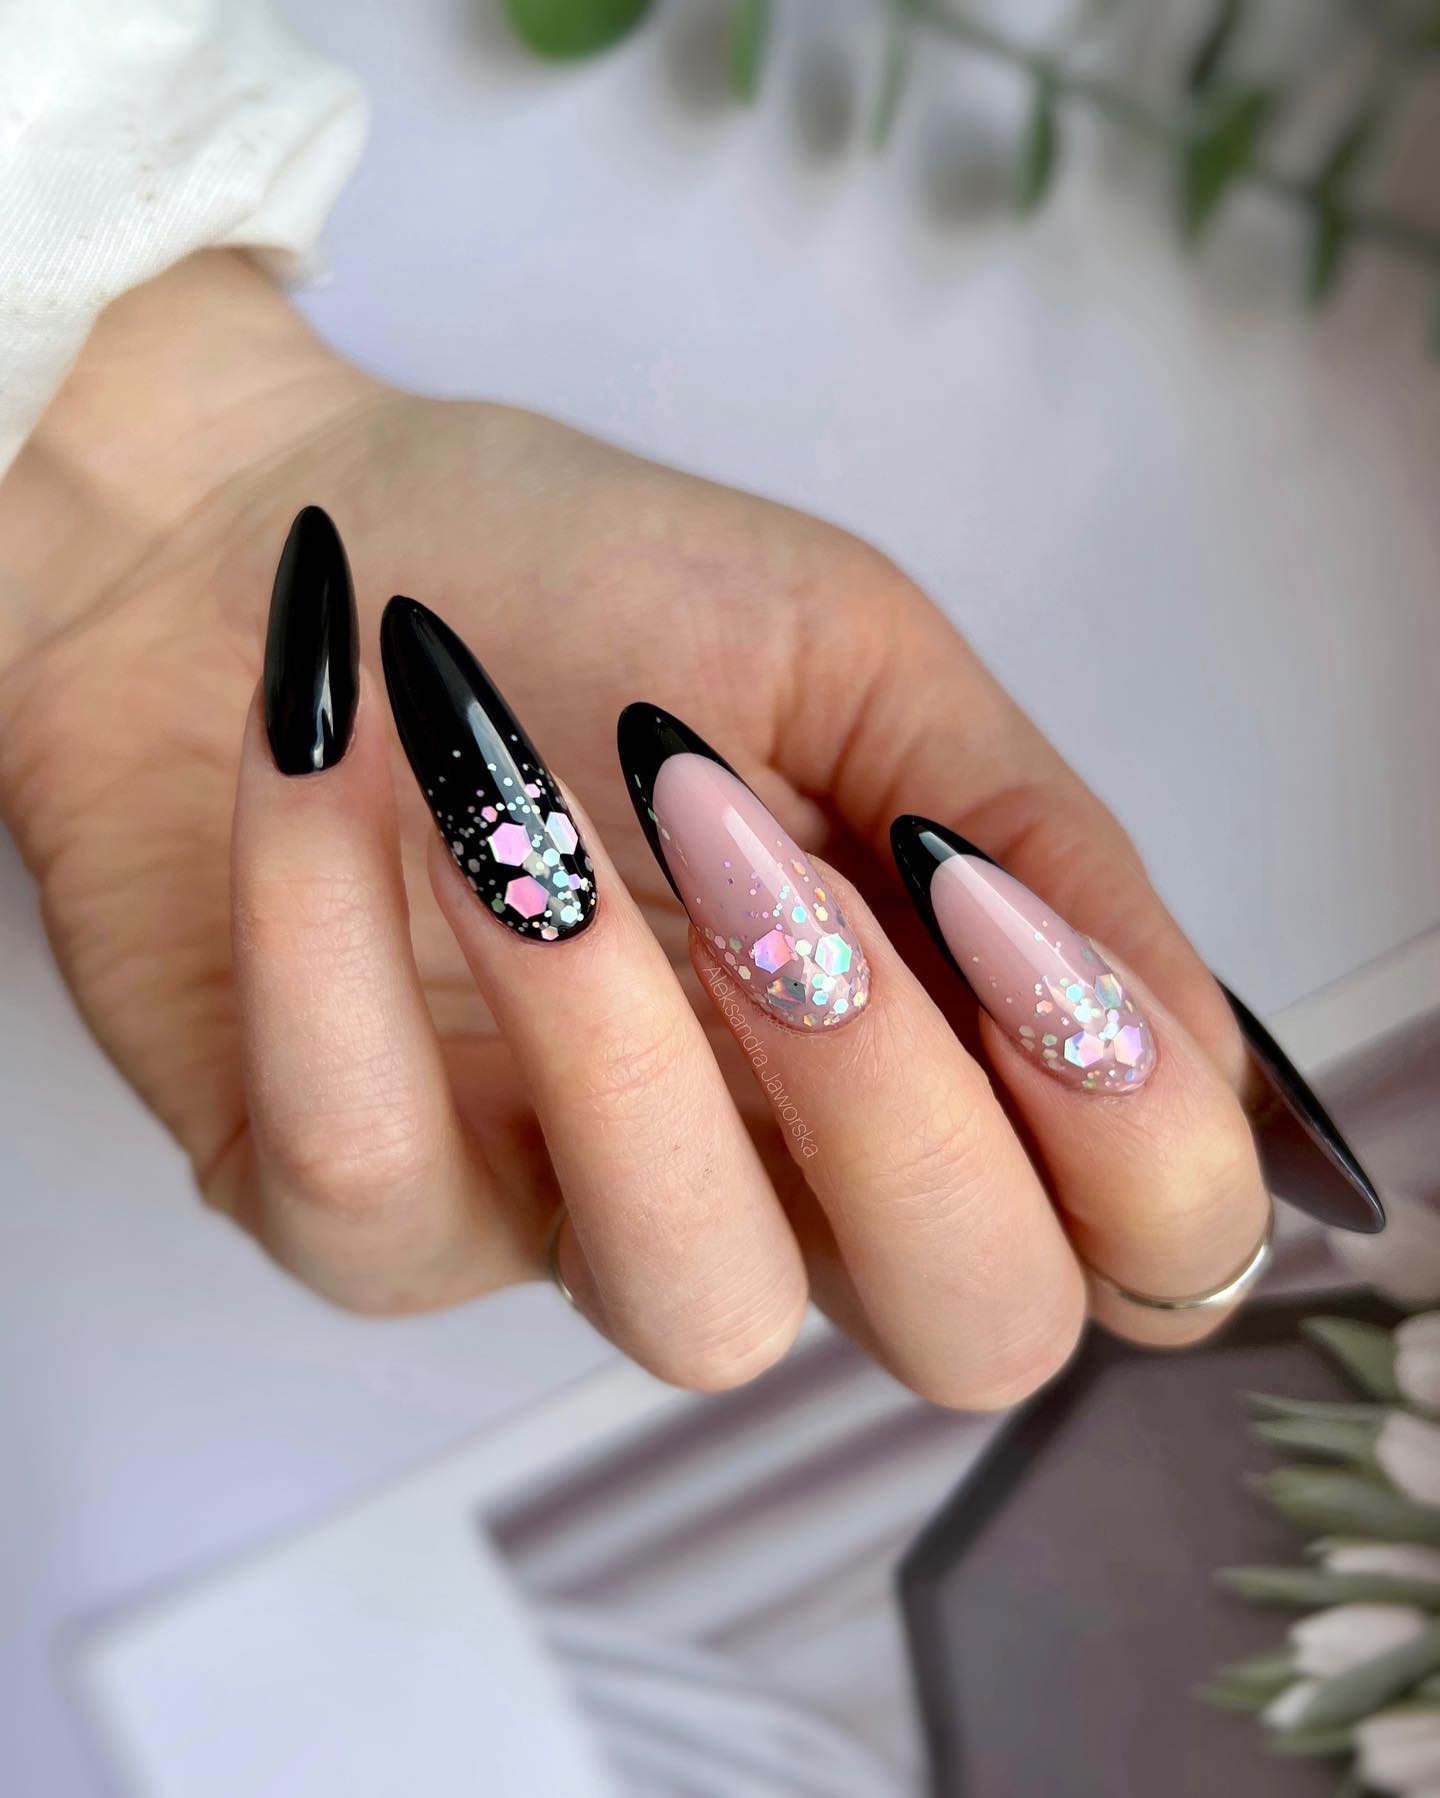 Black french tip nails with large glosses